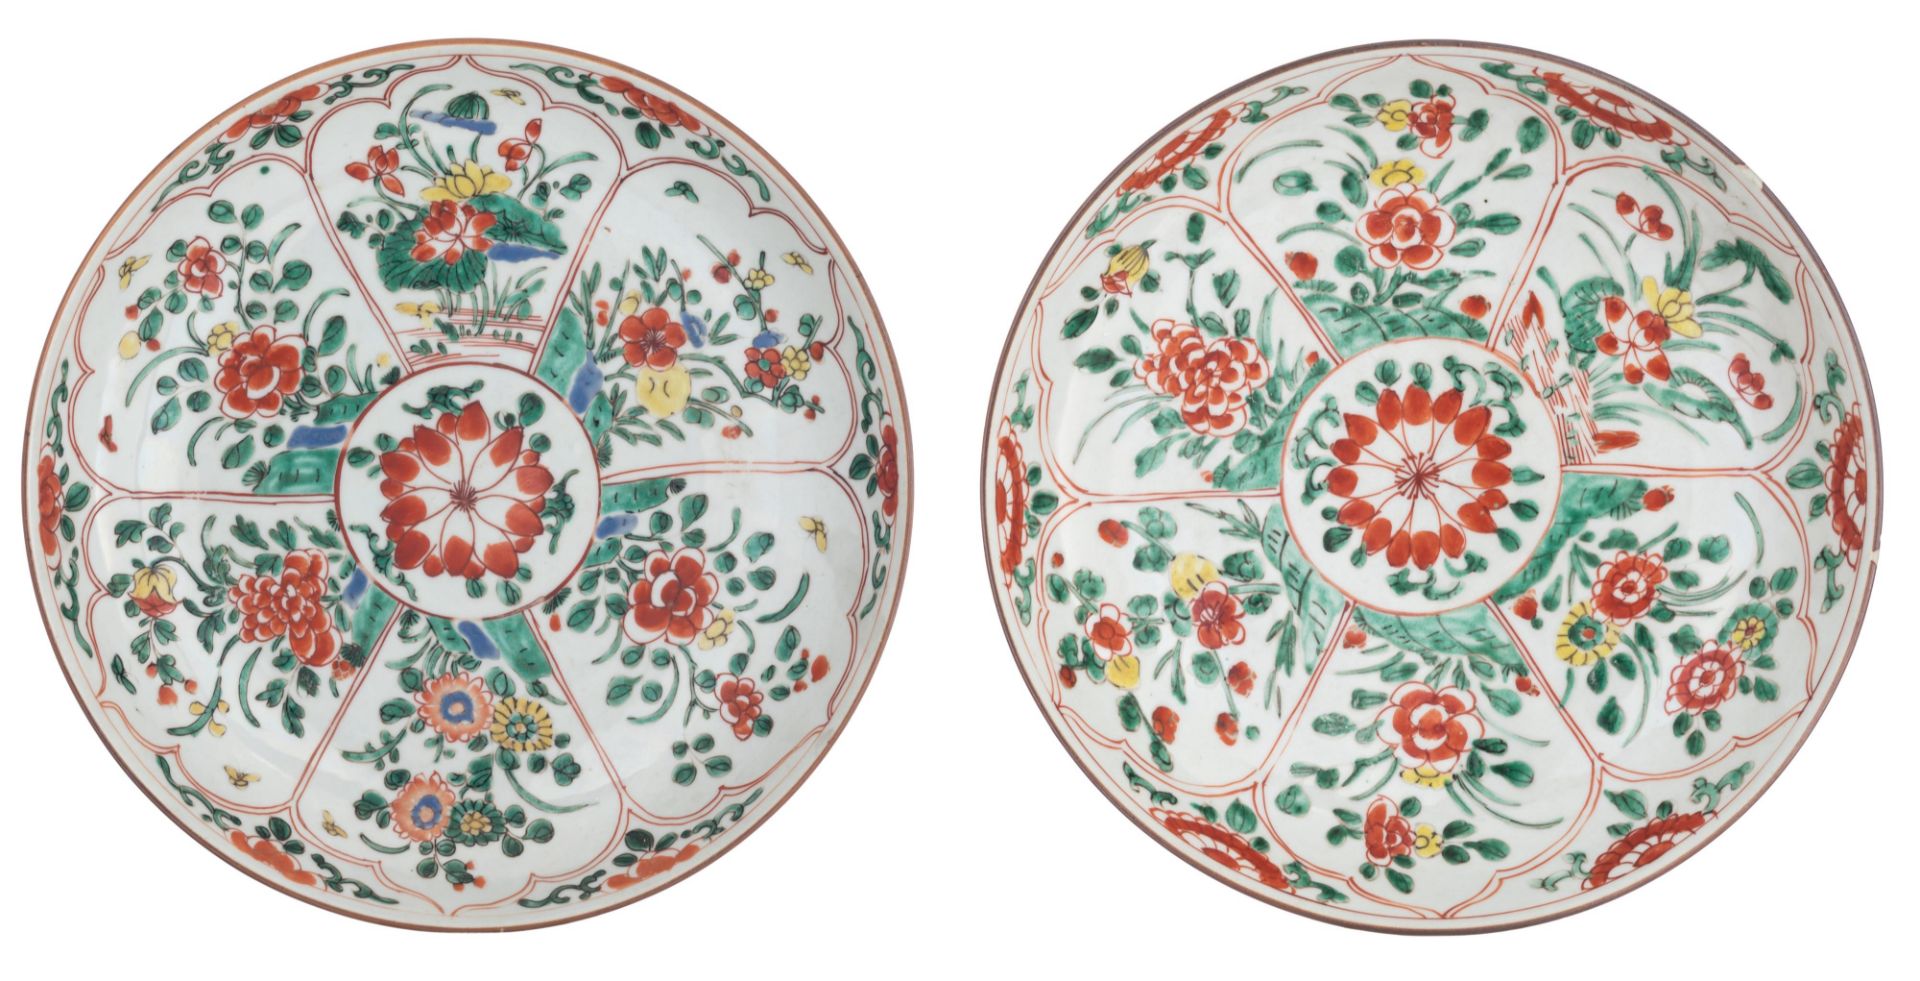 Two nearly identical Chinese famille verte 'Flower' plates, Kangxi period, ø 27,5 cm